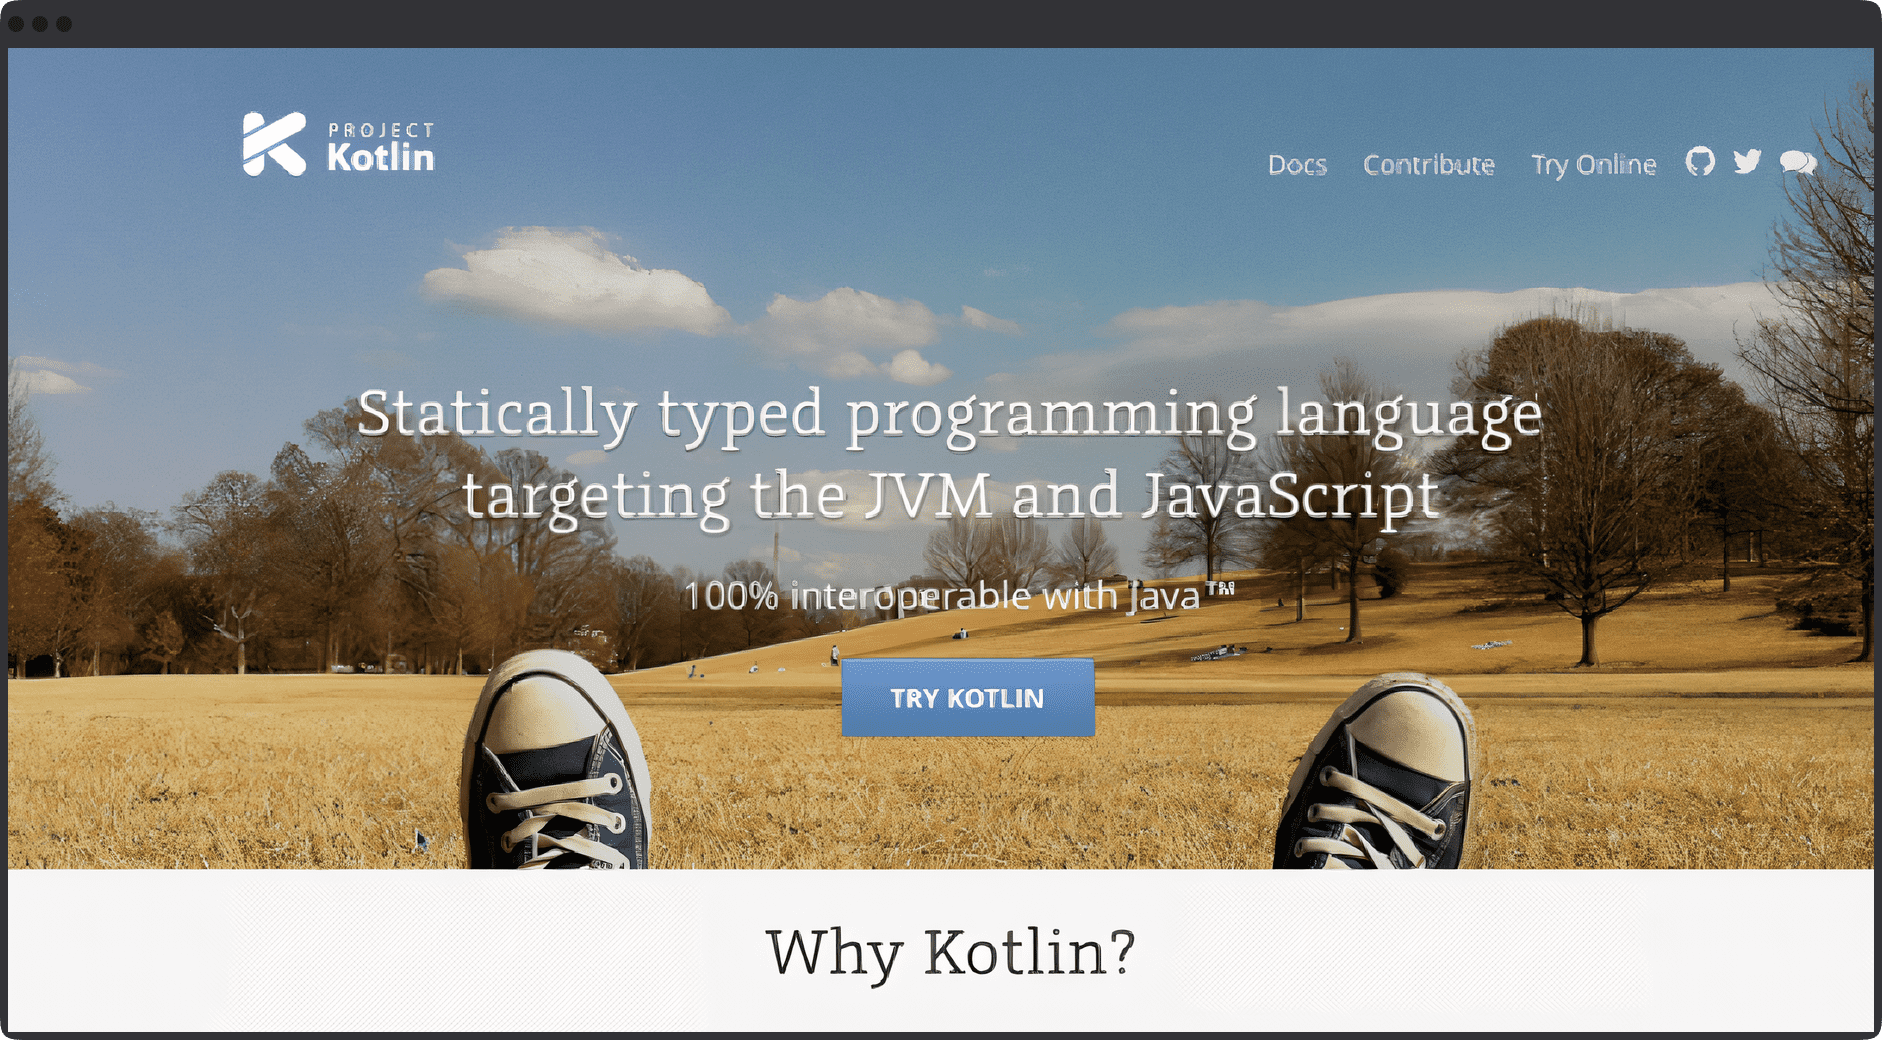 Kotlinlang.org was launched